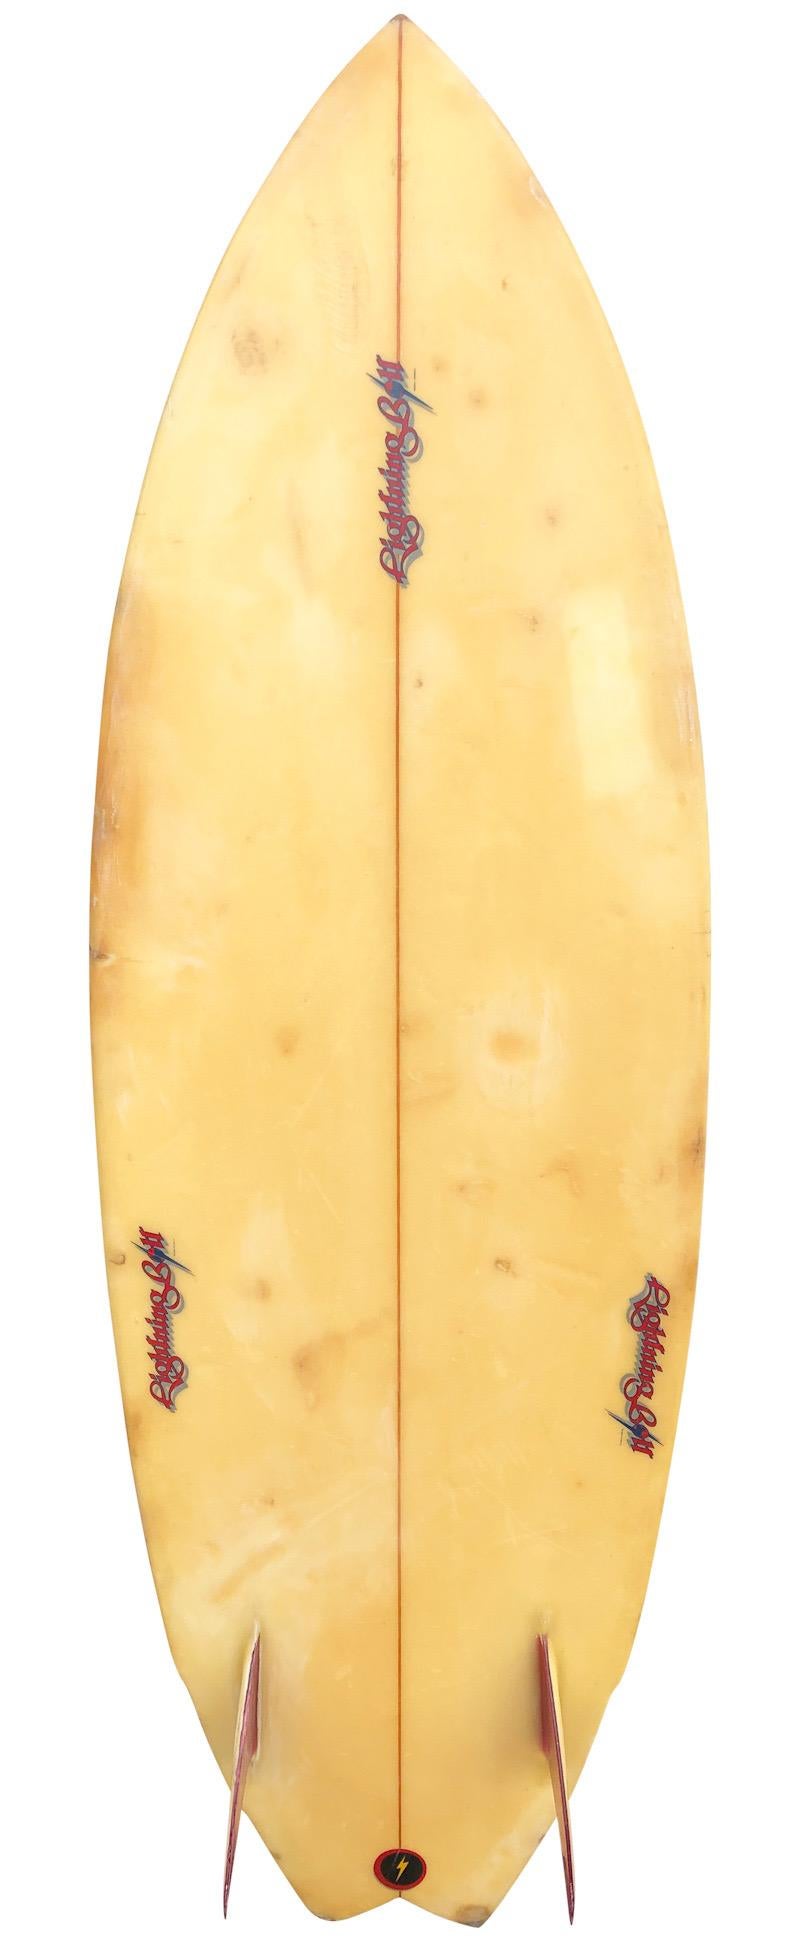 Mid-1980s lightning bolt Surfboard Rory Russell Model. Features a swallow tail twin fin shape with unique design consisting of numerous Lightning Bolt jags with vibrant rainbow color theme. The surfing legend Rory Russell was a 1st string Lightning